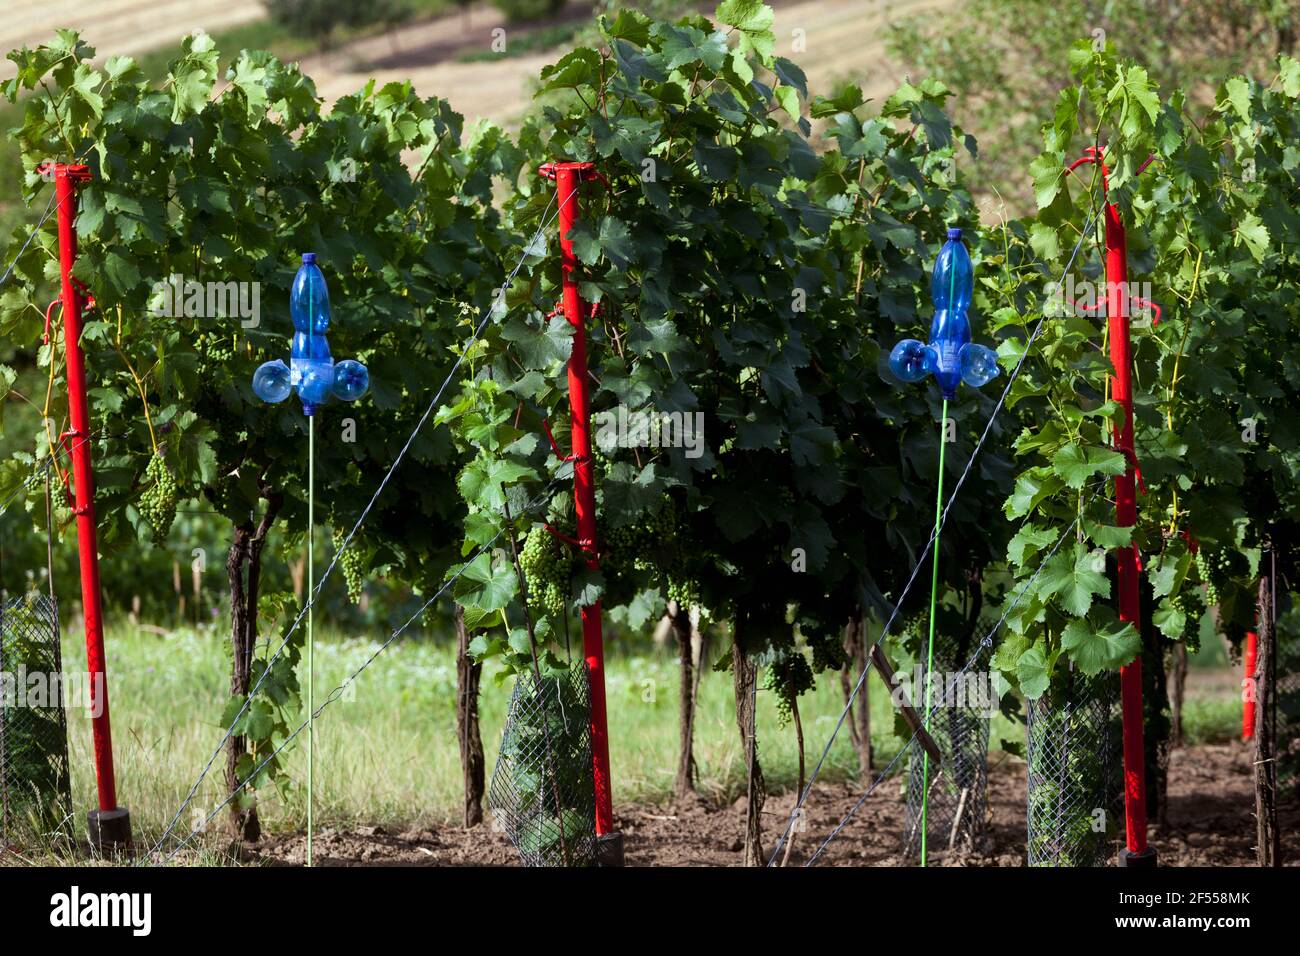 Old plastic bottles in the vineyard row Stock Photo